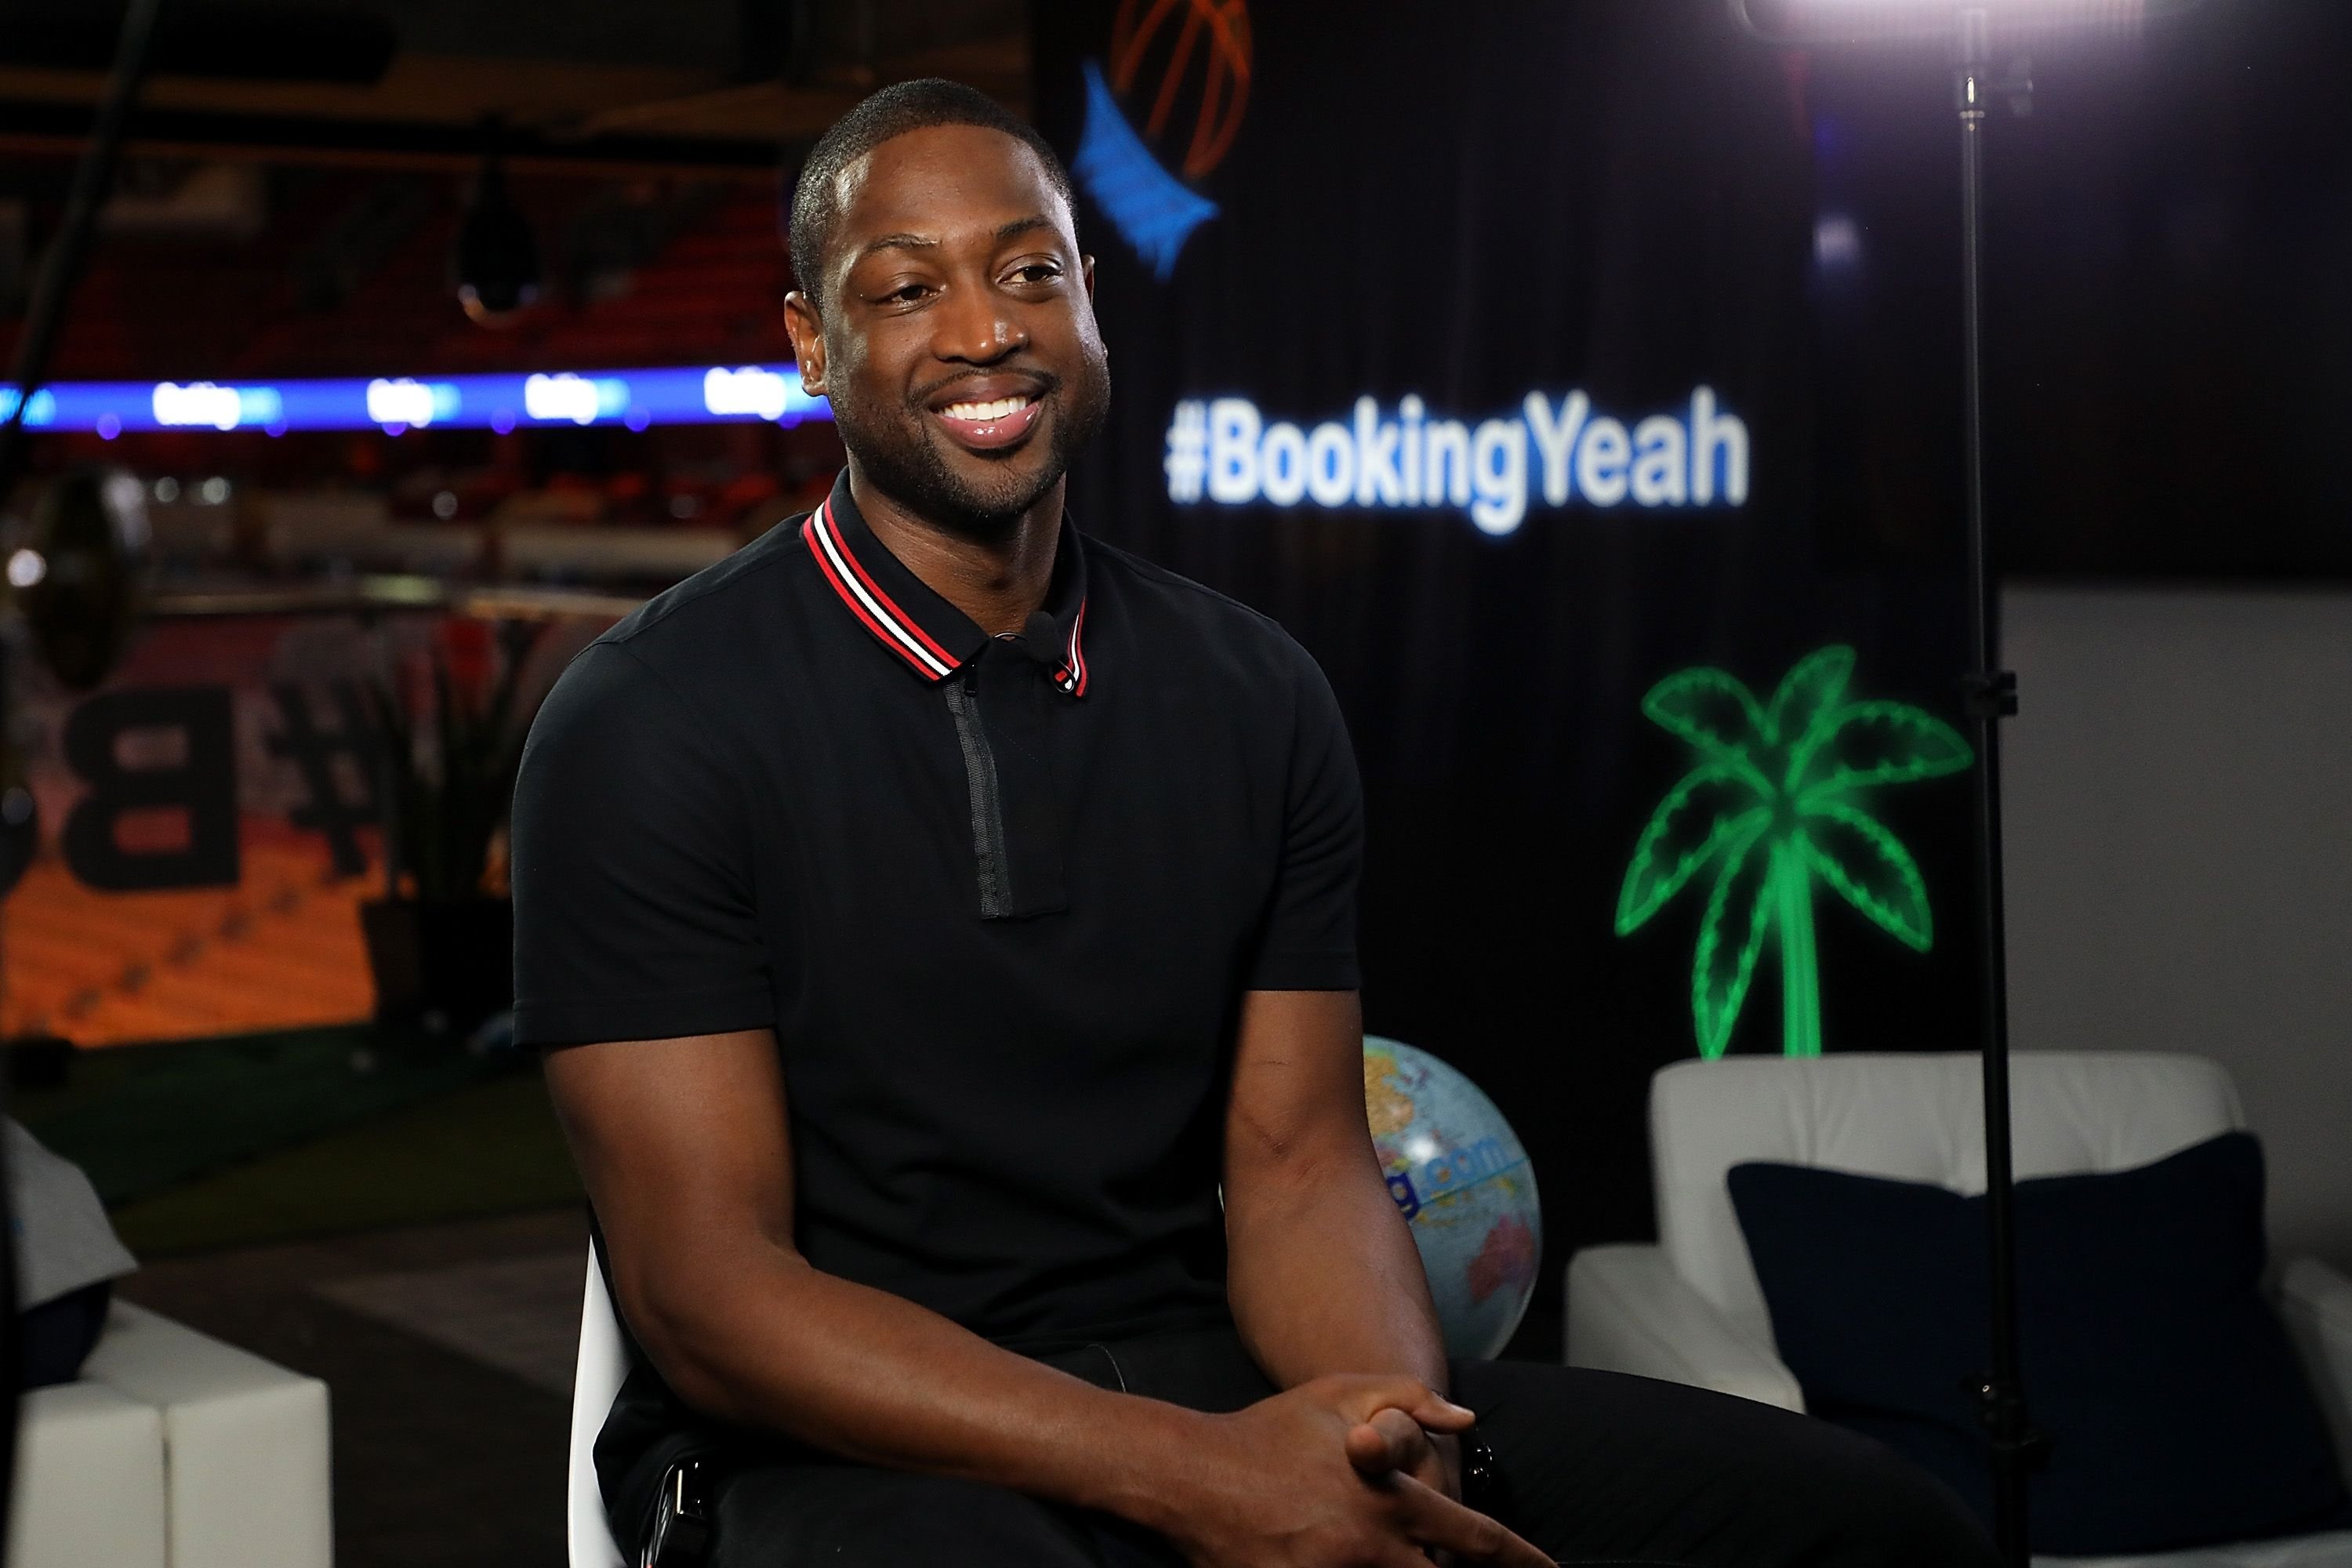  Dwyane Wadeat Booking.com Kicks Off March 7, 2018 in Miami, Florida | Photo: Getty Images